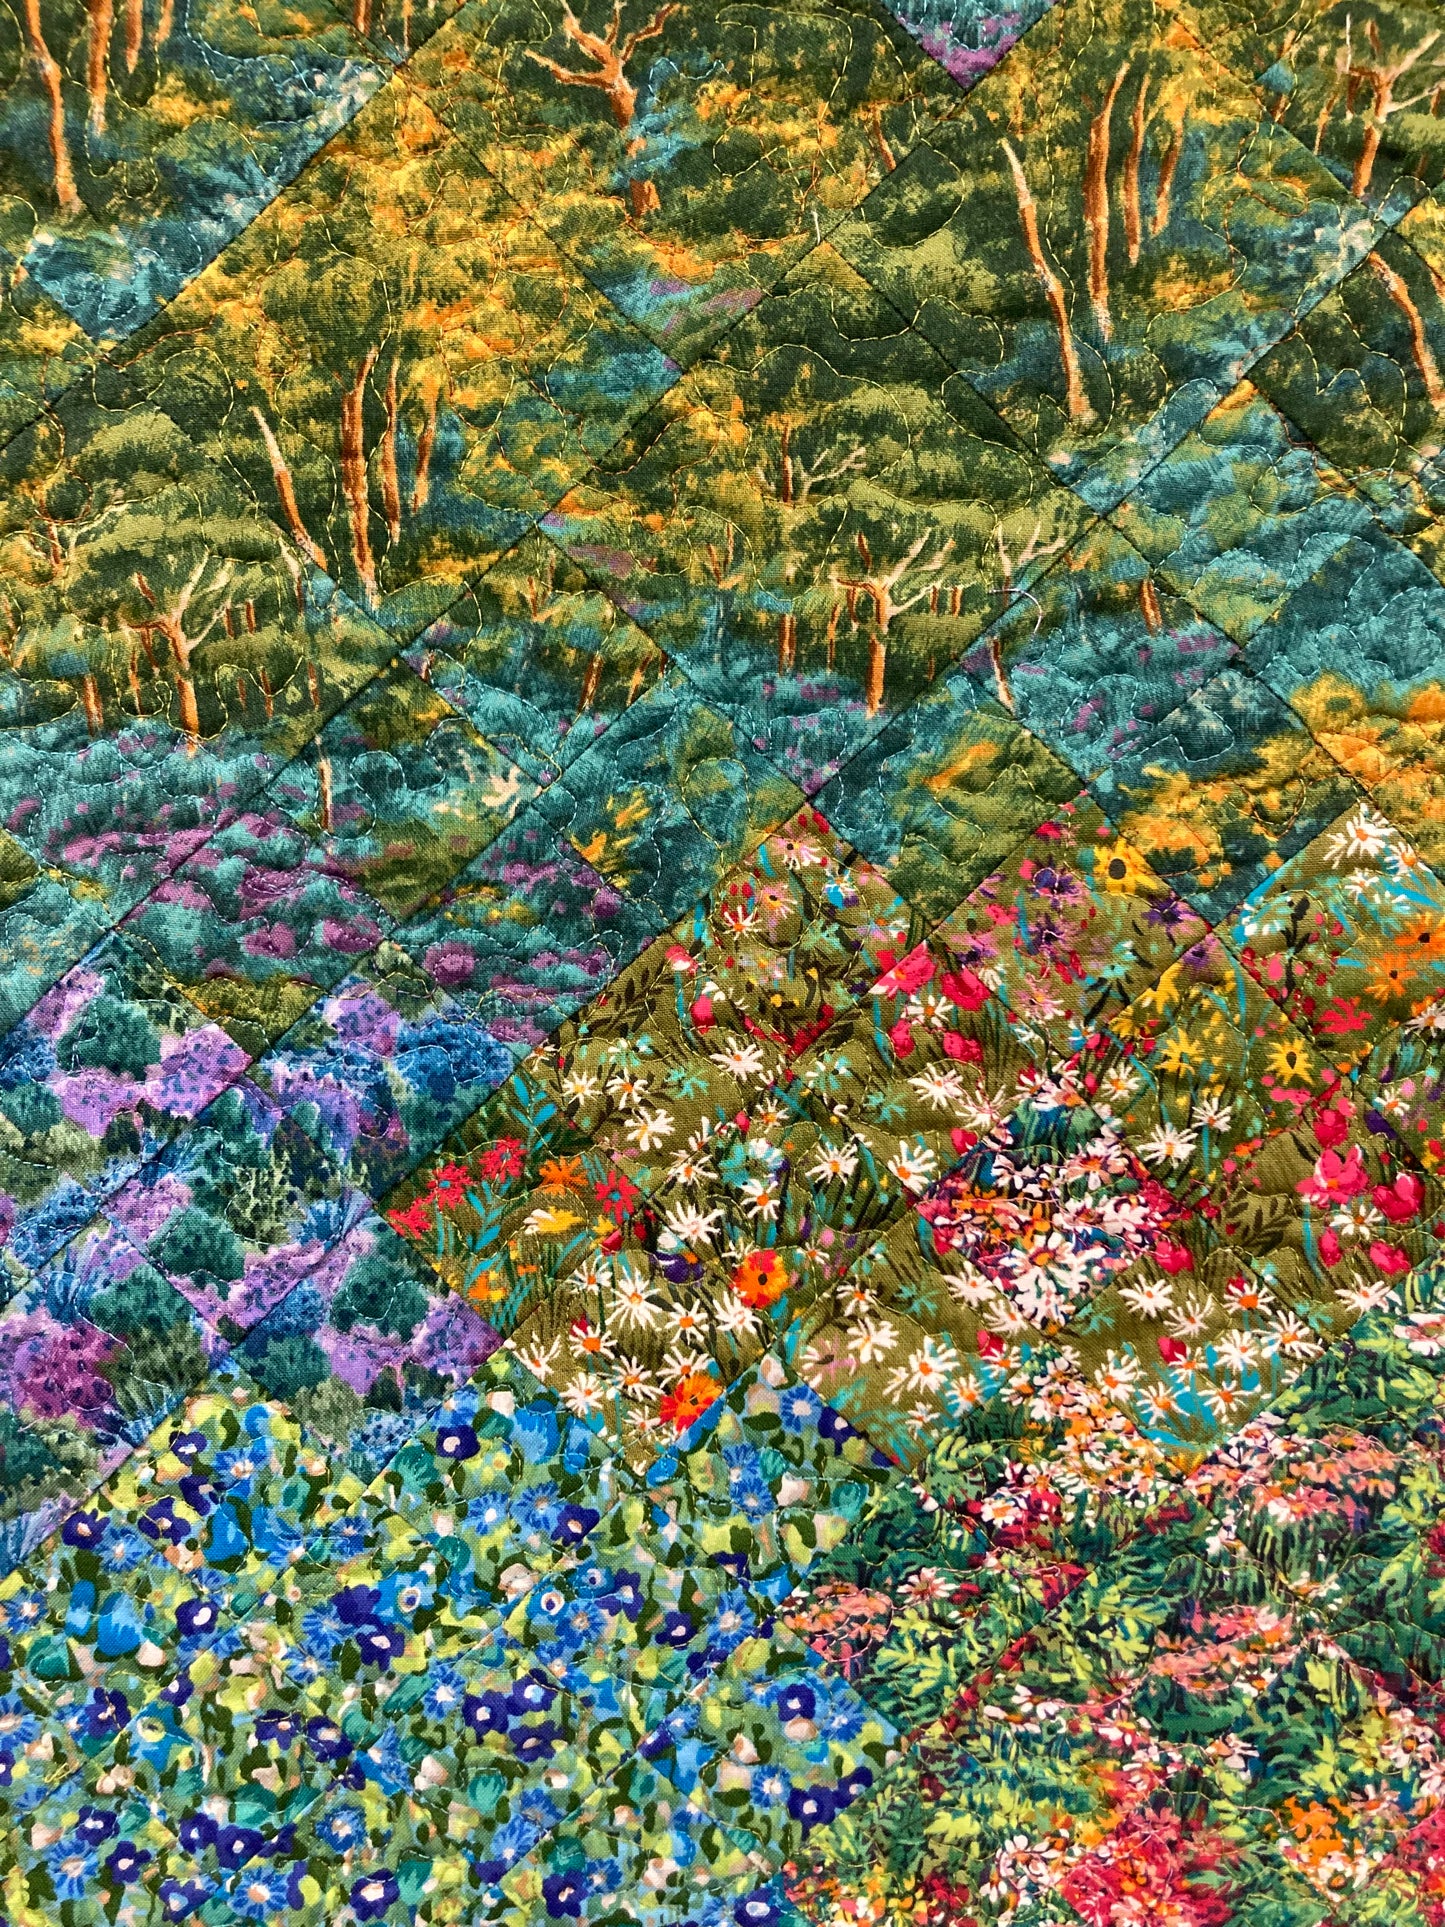 Mountain Art Quilt Tapestry, Turquoise Meadow Flowers Fabric Wall Hanging, Summer Trees Woods, 19x25" Original Handmade Artwork Home Office